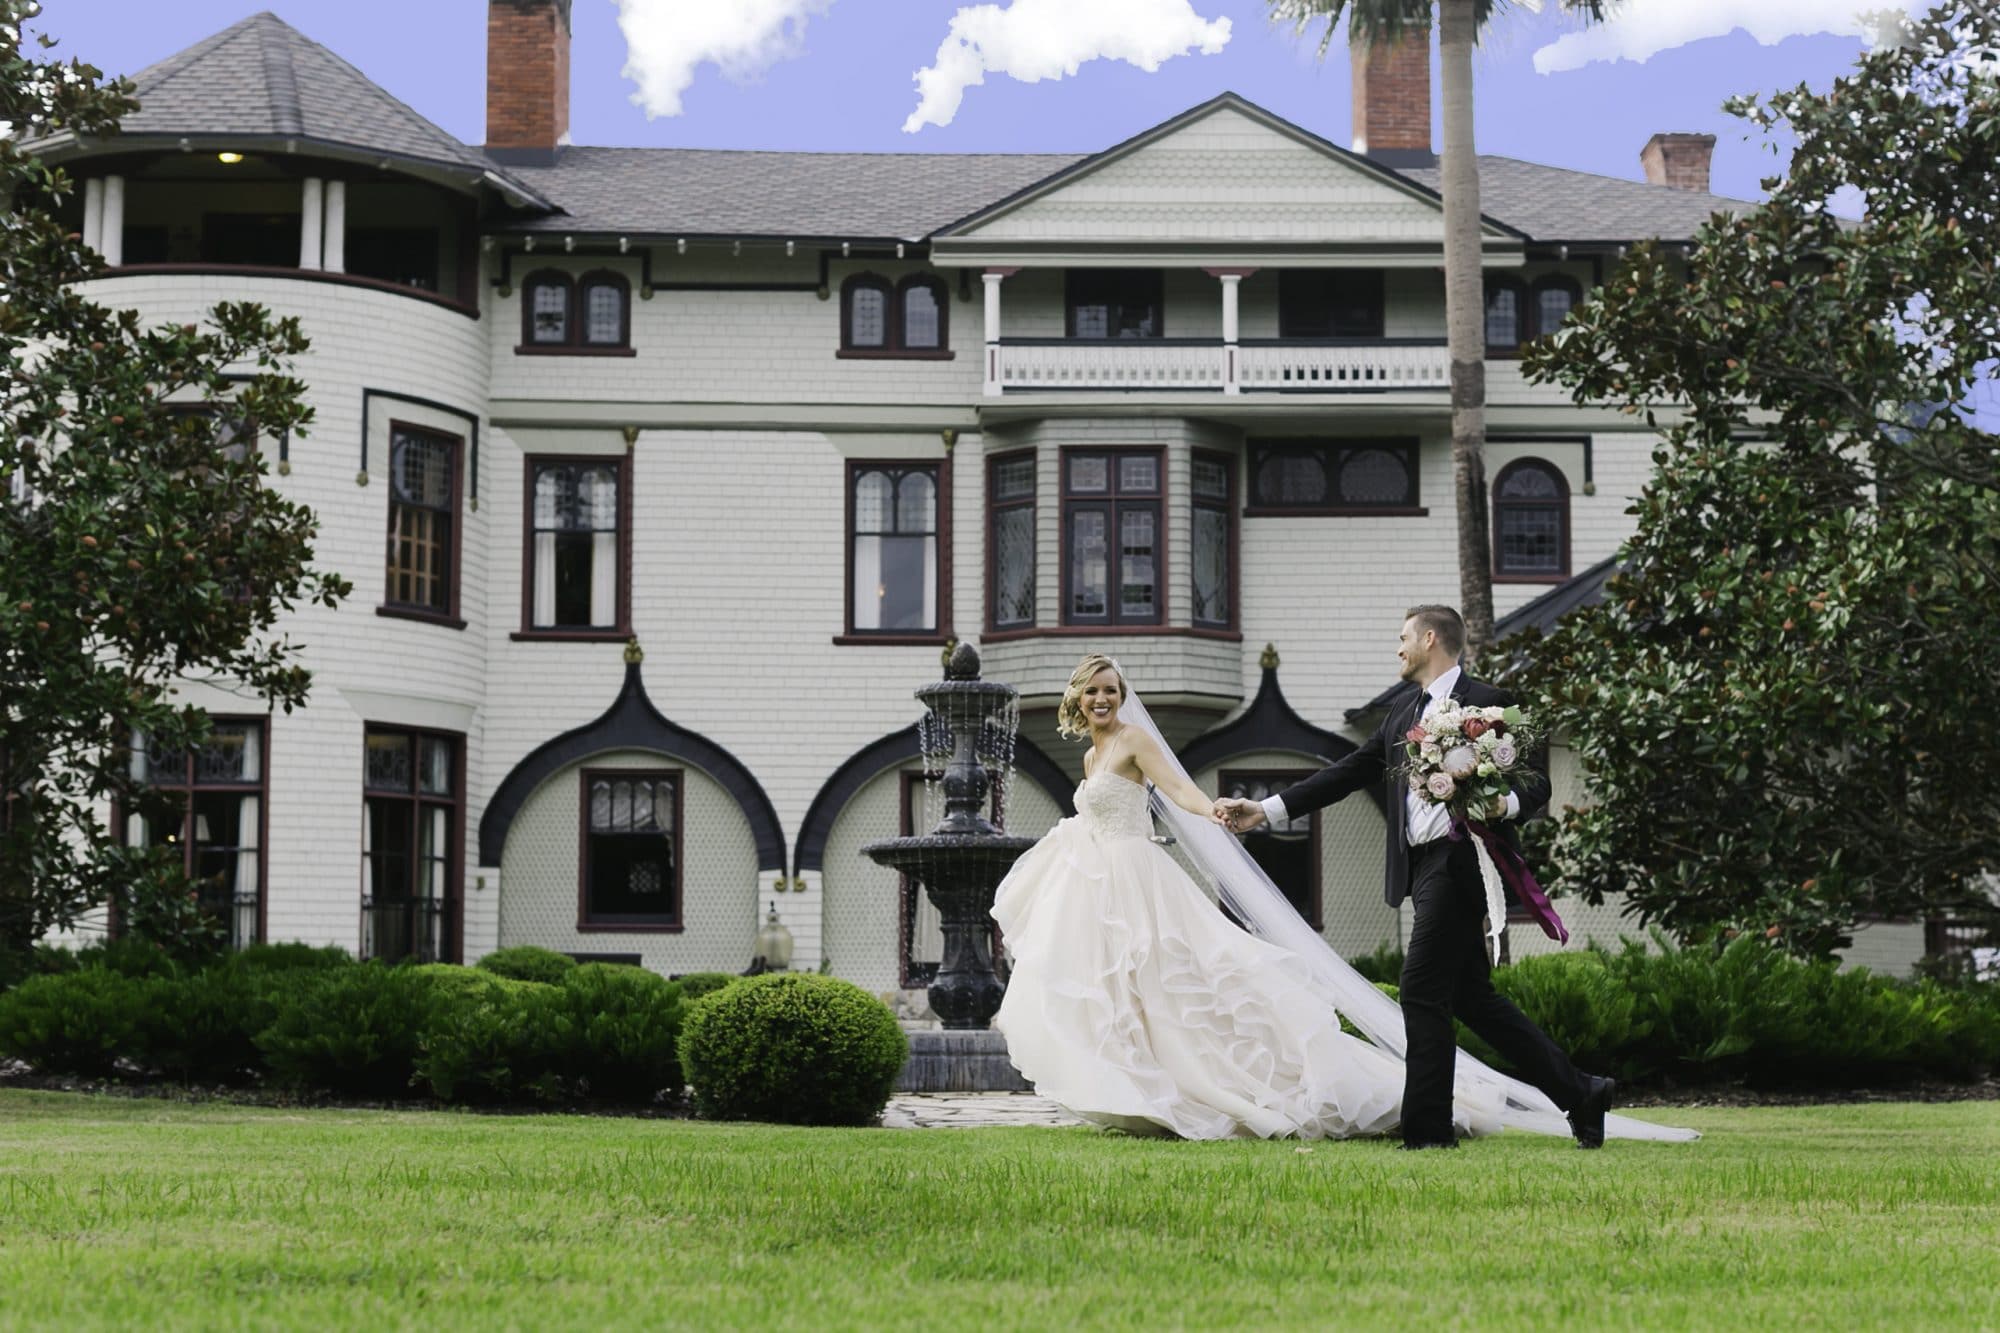 Stetson Mansion - bride and groom outside of charming Victorian mansion